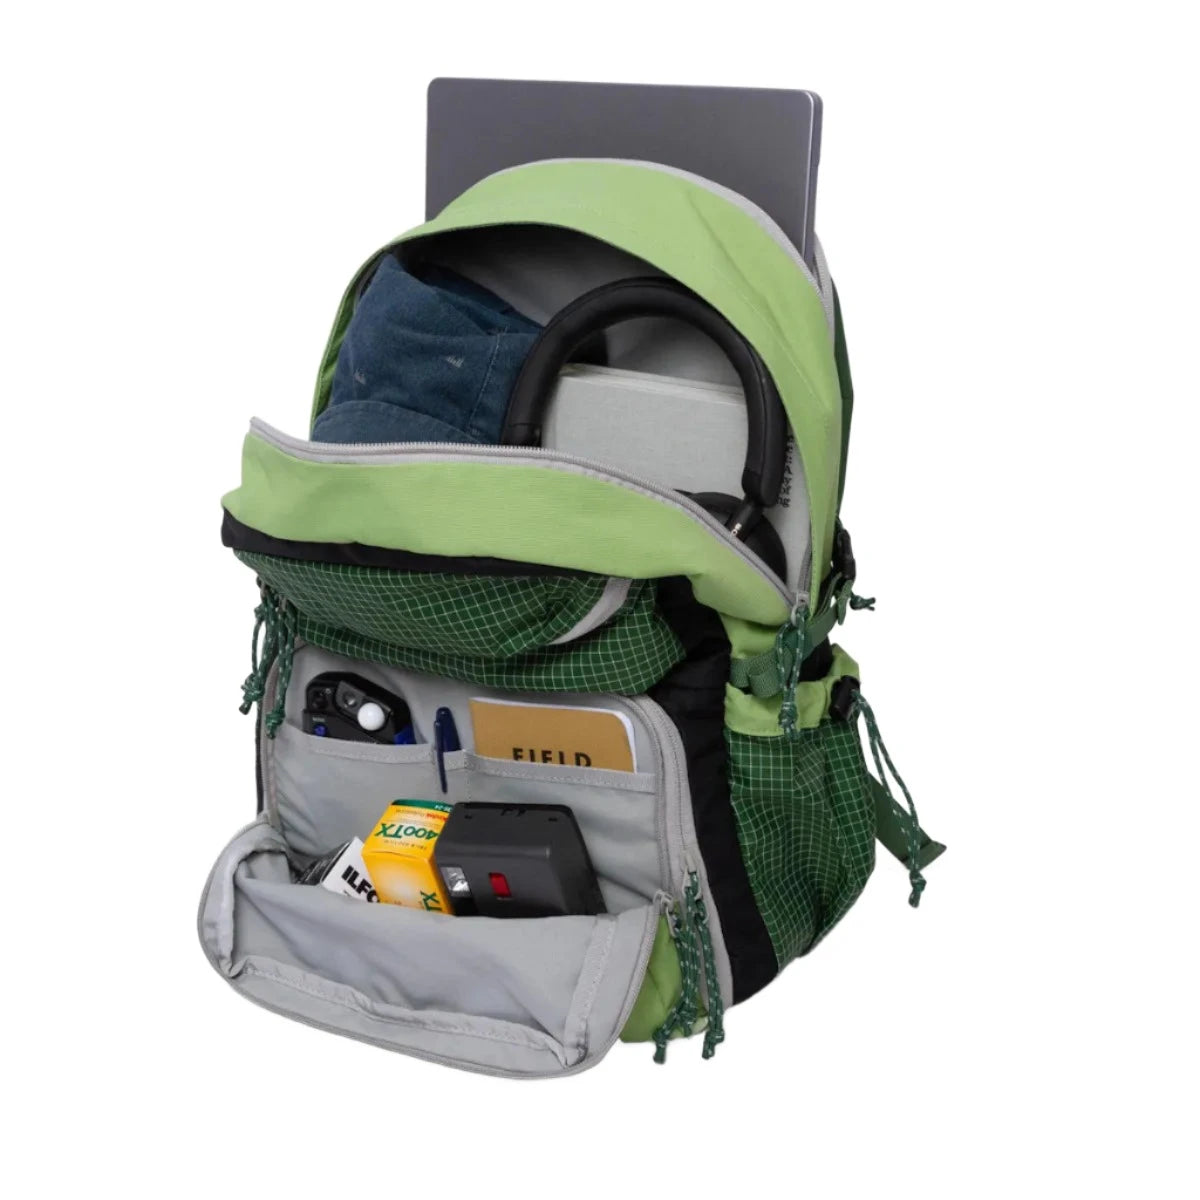 Long Weekend Morro Convertible Backpack - Moss zippered compartments open